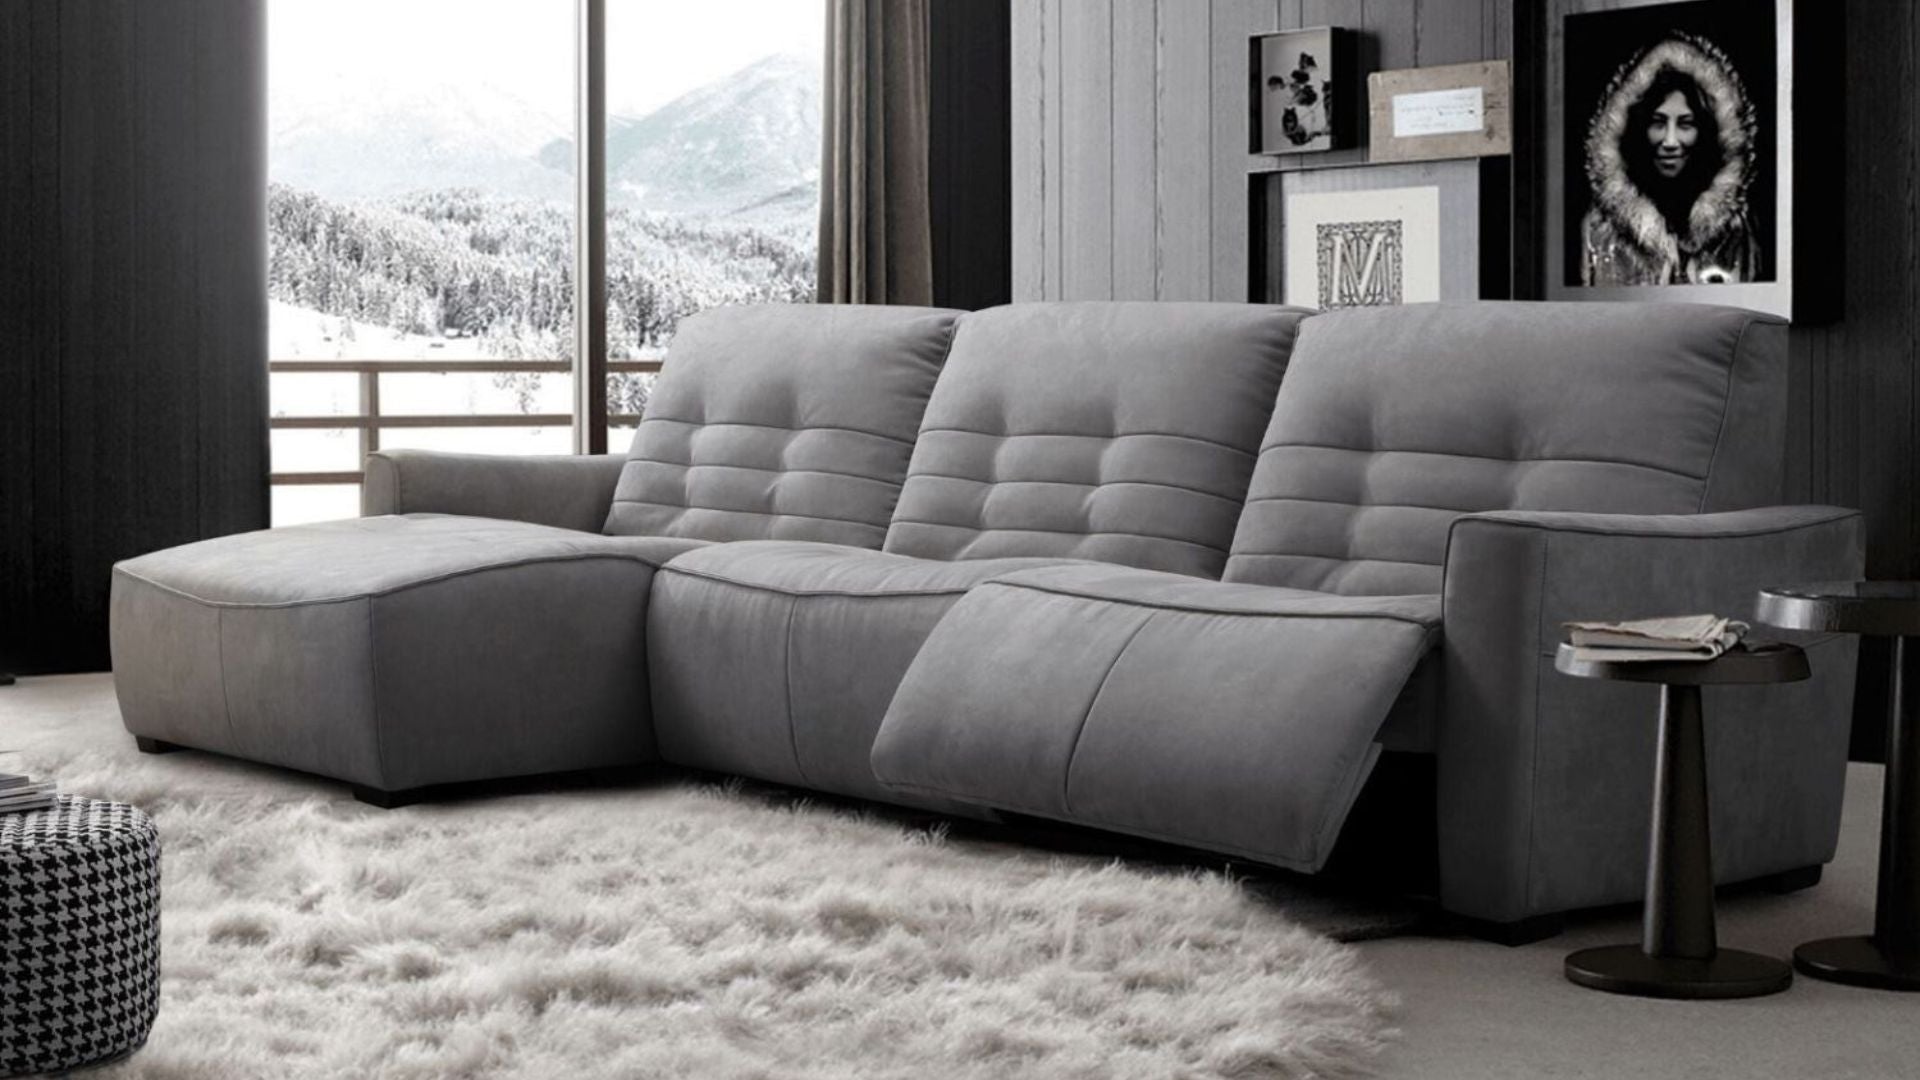 Sillon Relax Tab - Sillones Relax